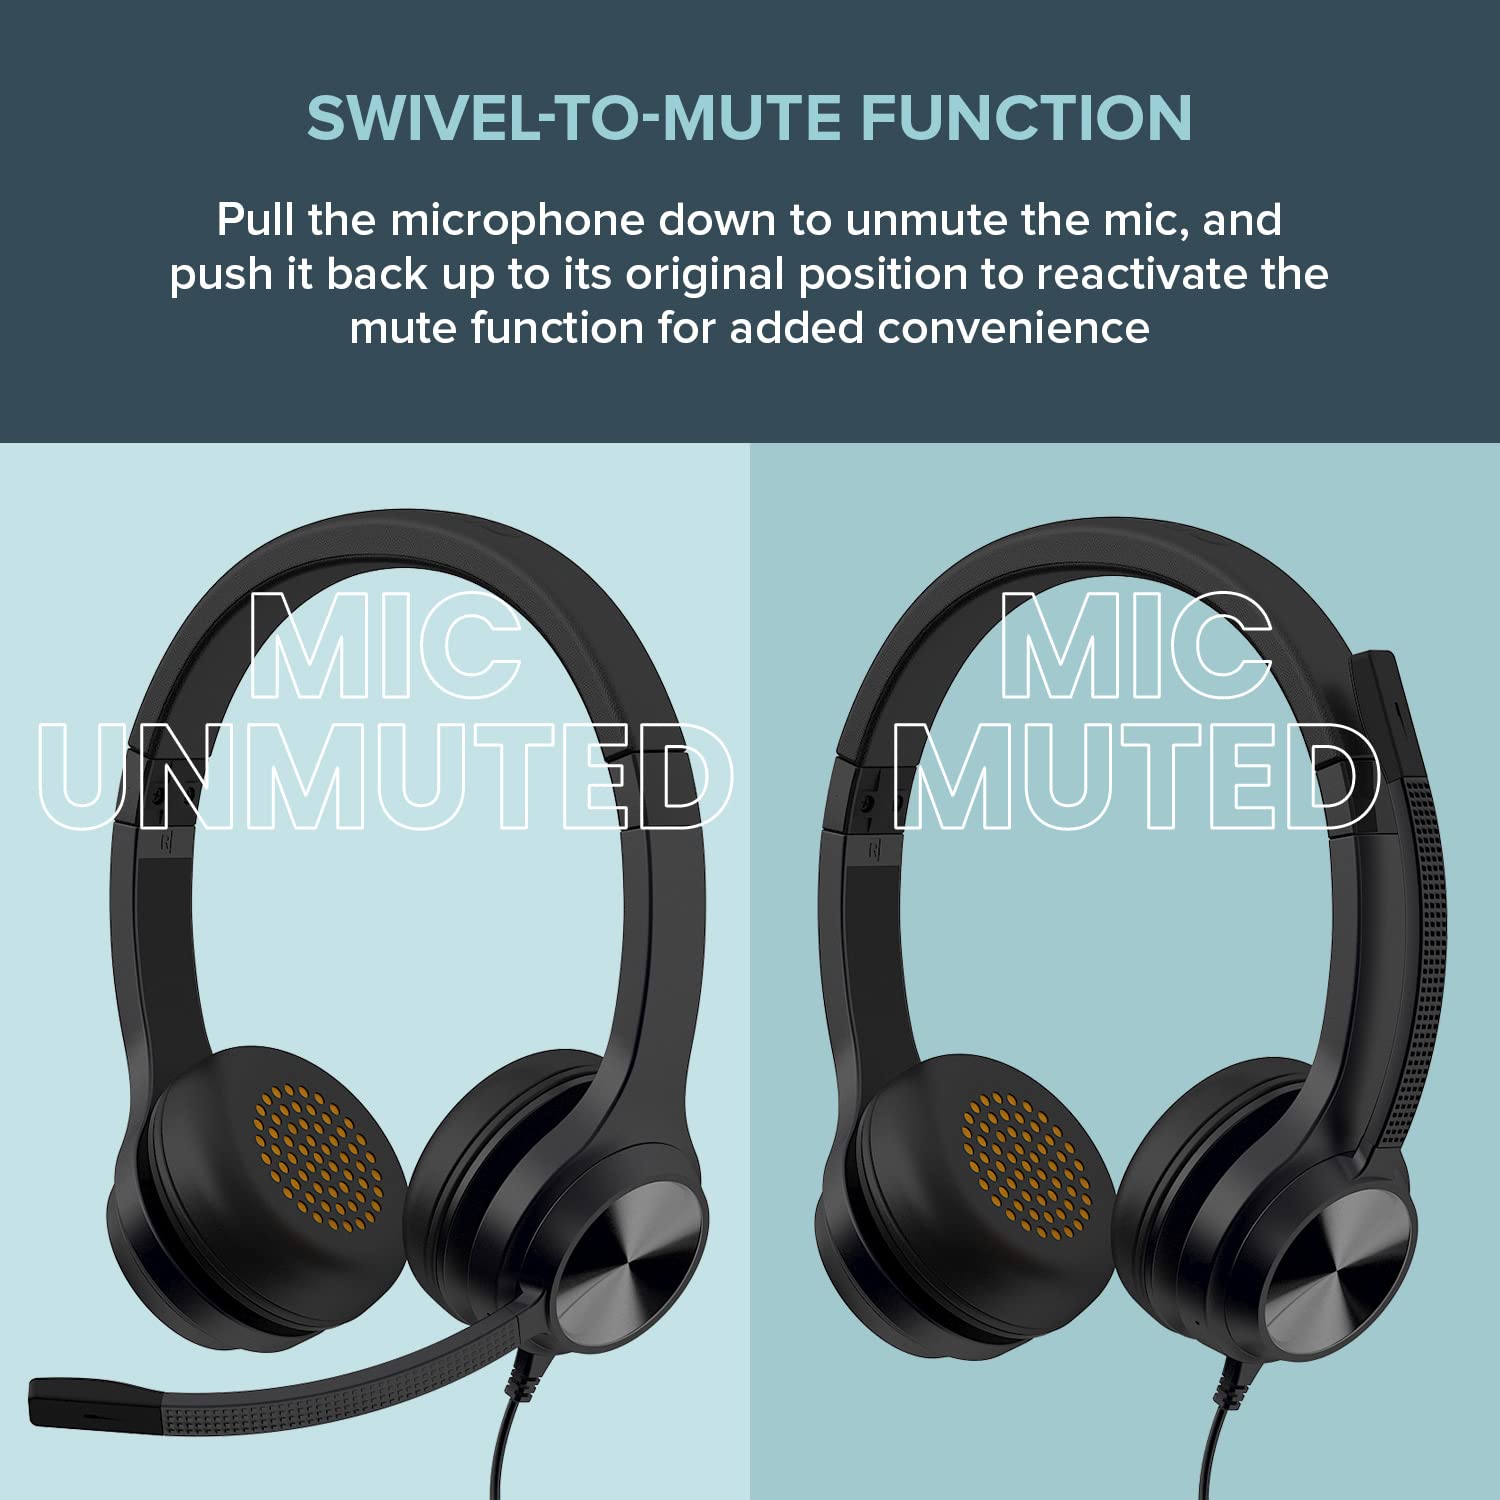 Creative Chat USB On-Ear Headset with Swivel-to-Mute Noise-Cancelling Boom Mic, Mic-Monitoring, SmartComms Kit, Playback and Calls Control for PC, Mac, Consoles